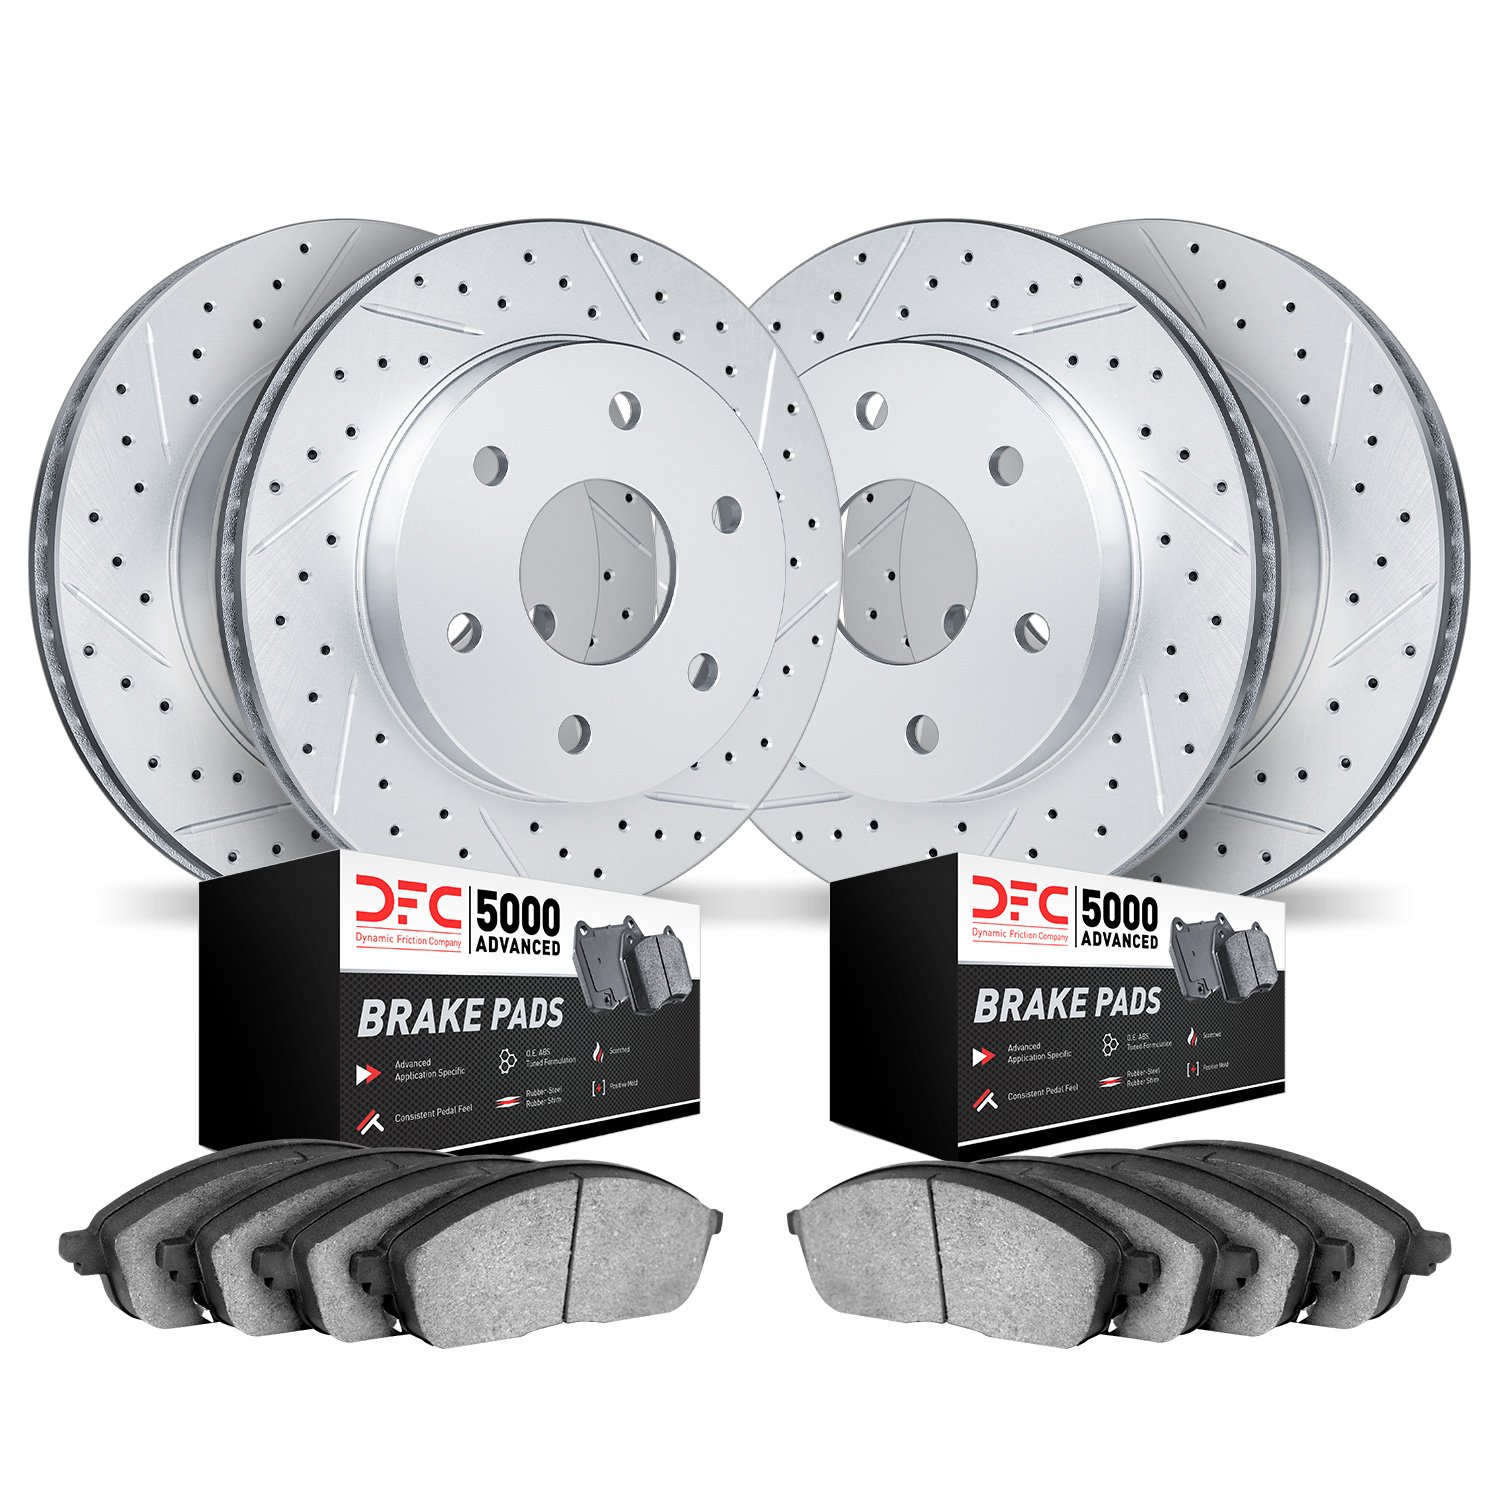 2504-48035 Geoperformance Drilled/Slotted Rotors w/5000 Advanced Brake Pads Kit, 2007-2008 GM, Position: Front and Rear